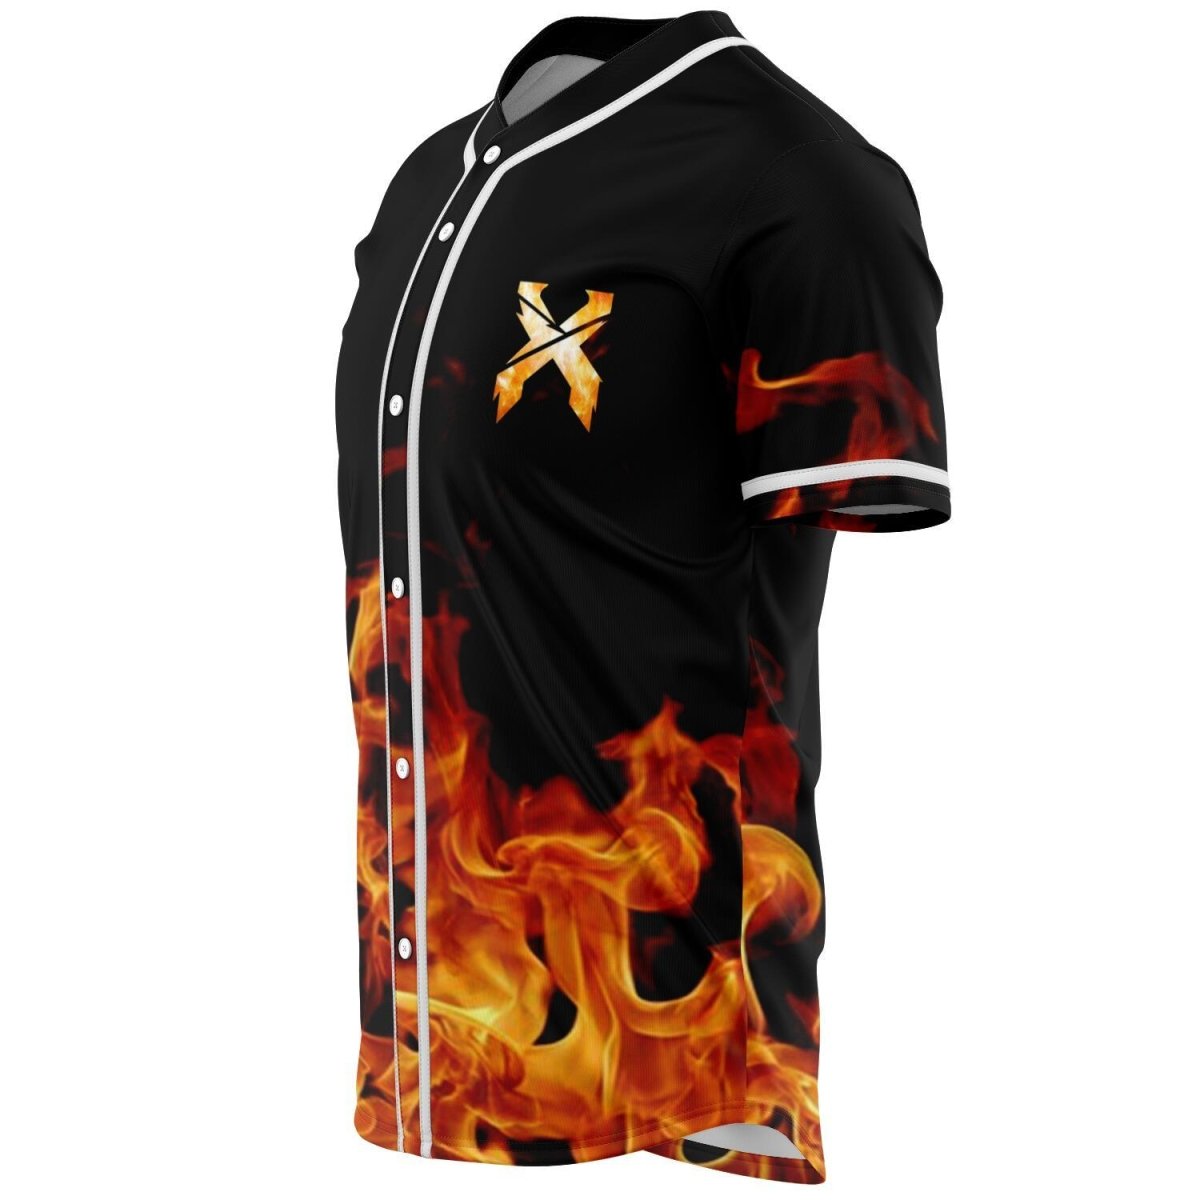 Excision blood rave jersey - Rave Jersey